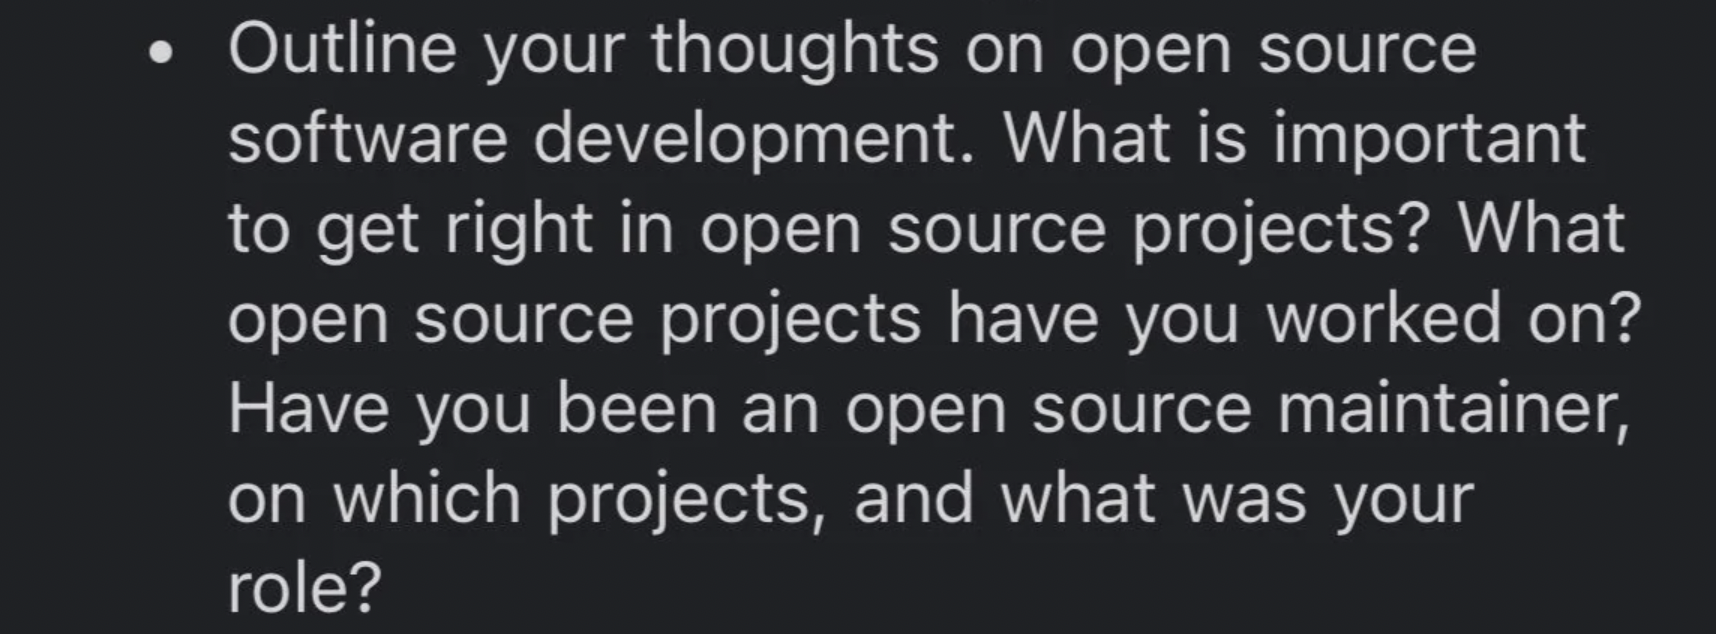 paper - Outline your thoughts on open source software development. What is important to get right in open source projects? What open source projects have you worked on? Have you been an open source maintainer, on which projects, and what was your role?